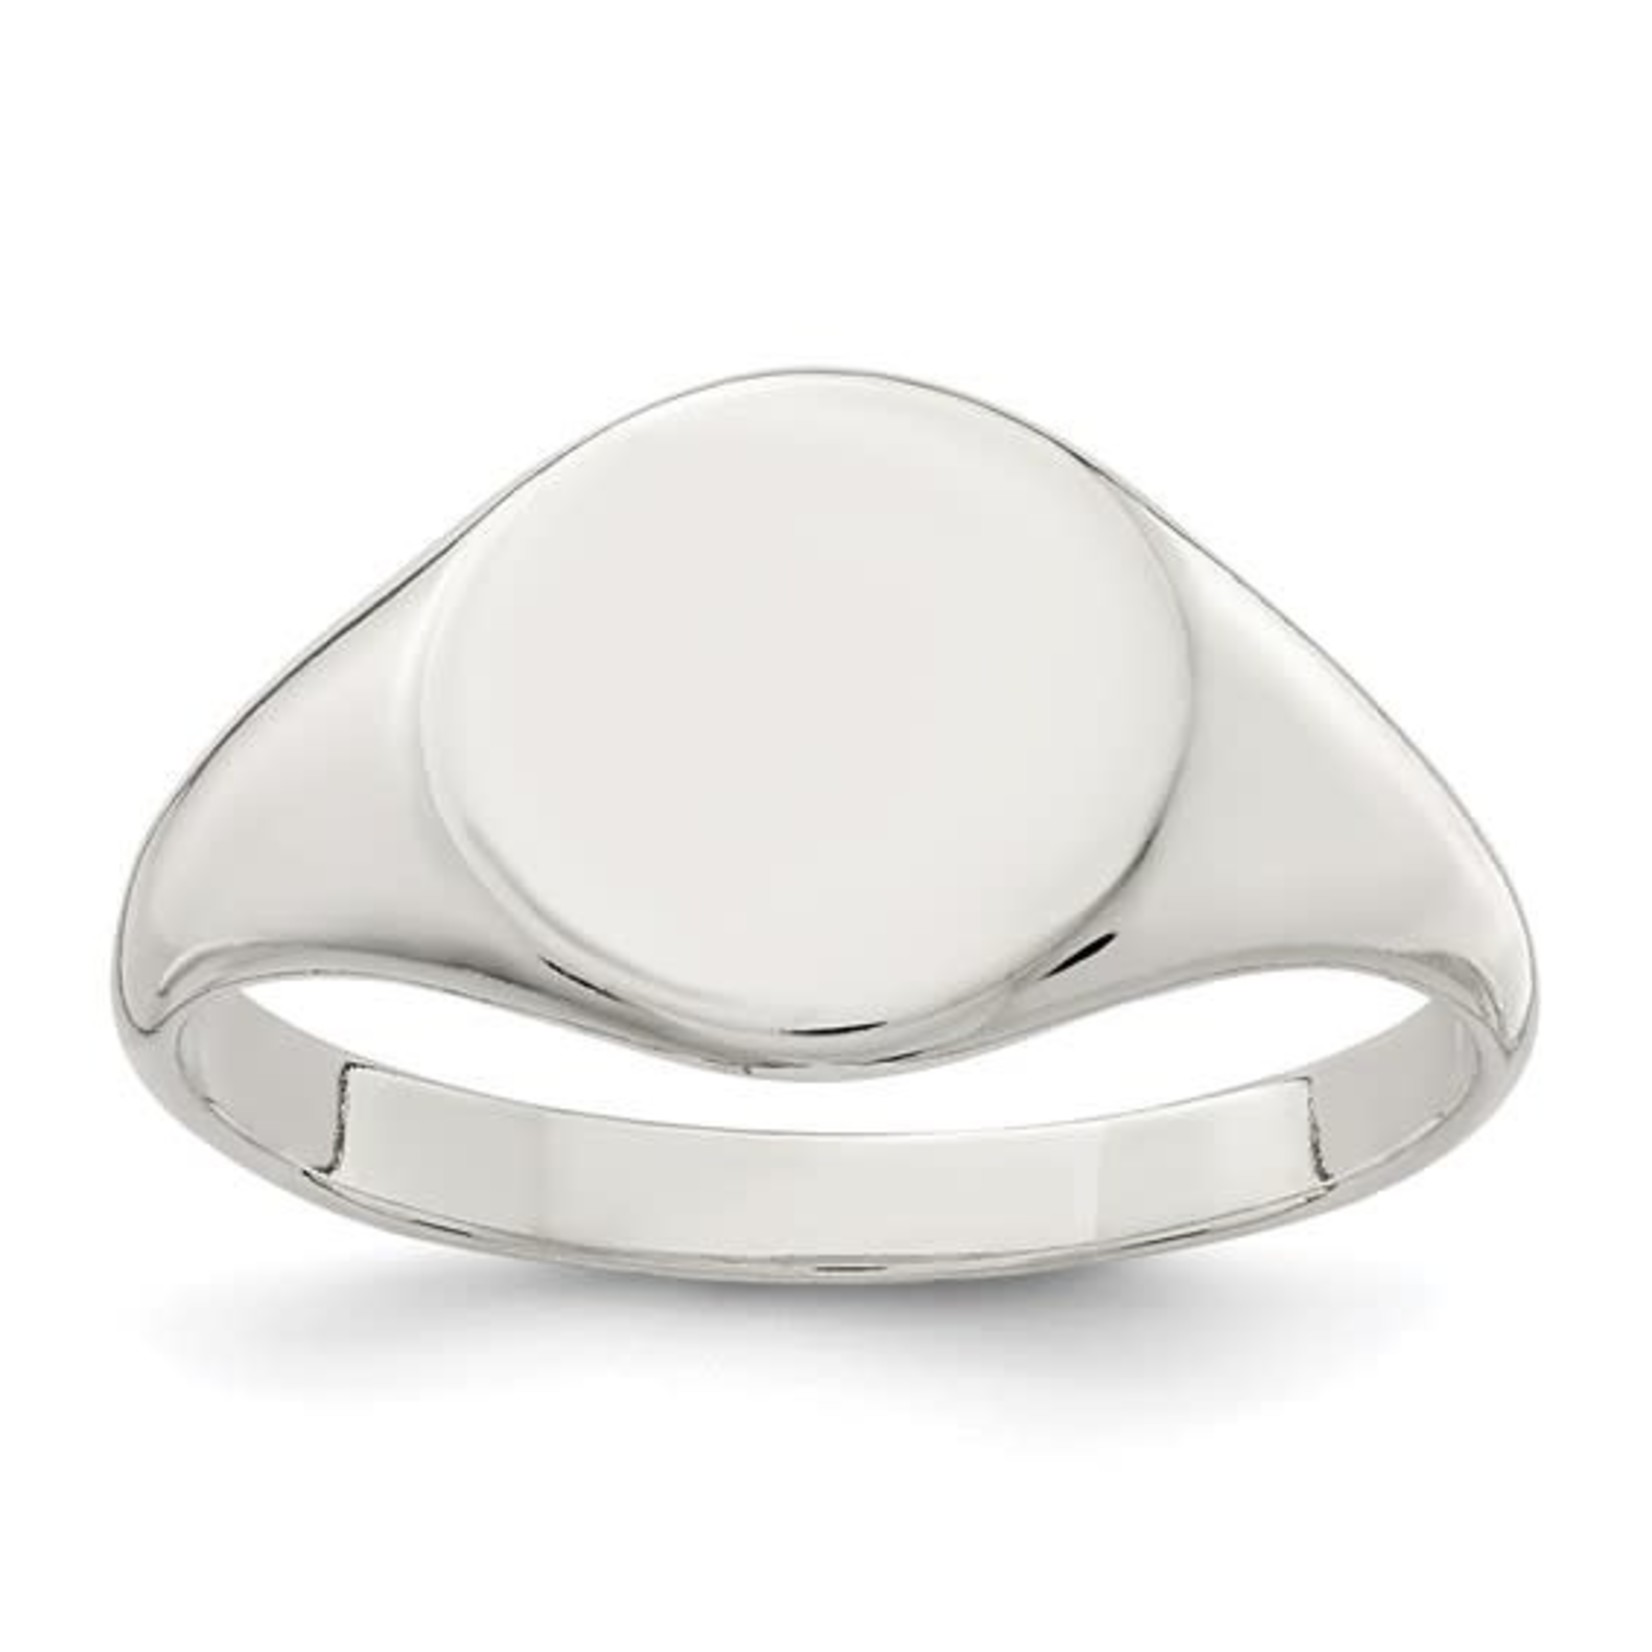 This Is Life Sterling Silver Signet Ring